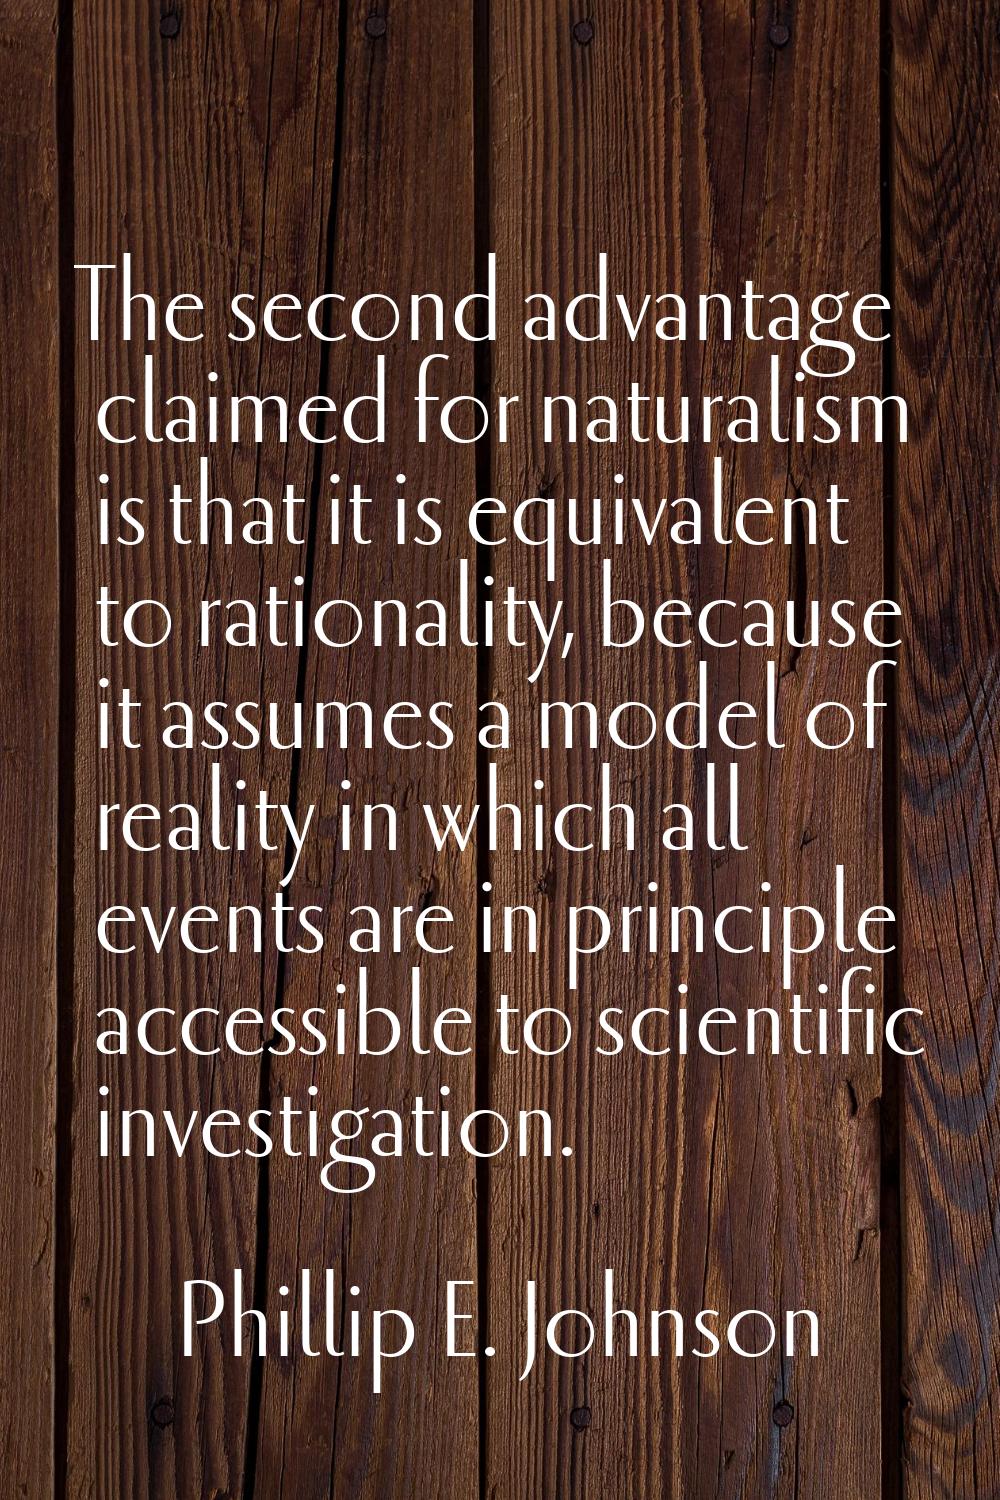 The second advantage claimed for naturalism is that it is equivalent to rationality, because it ass